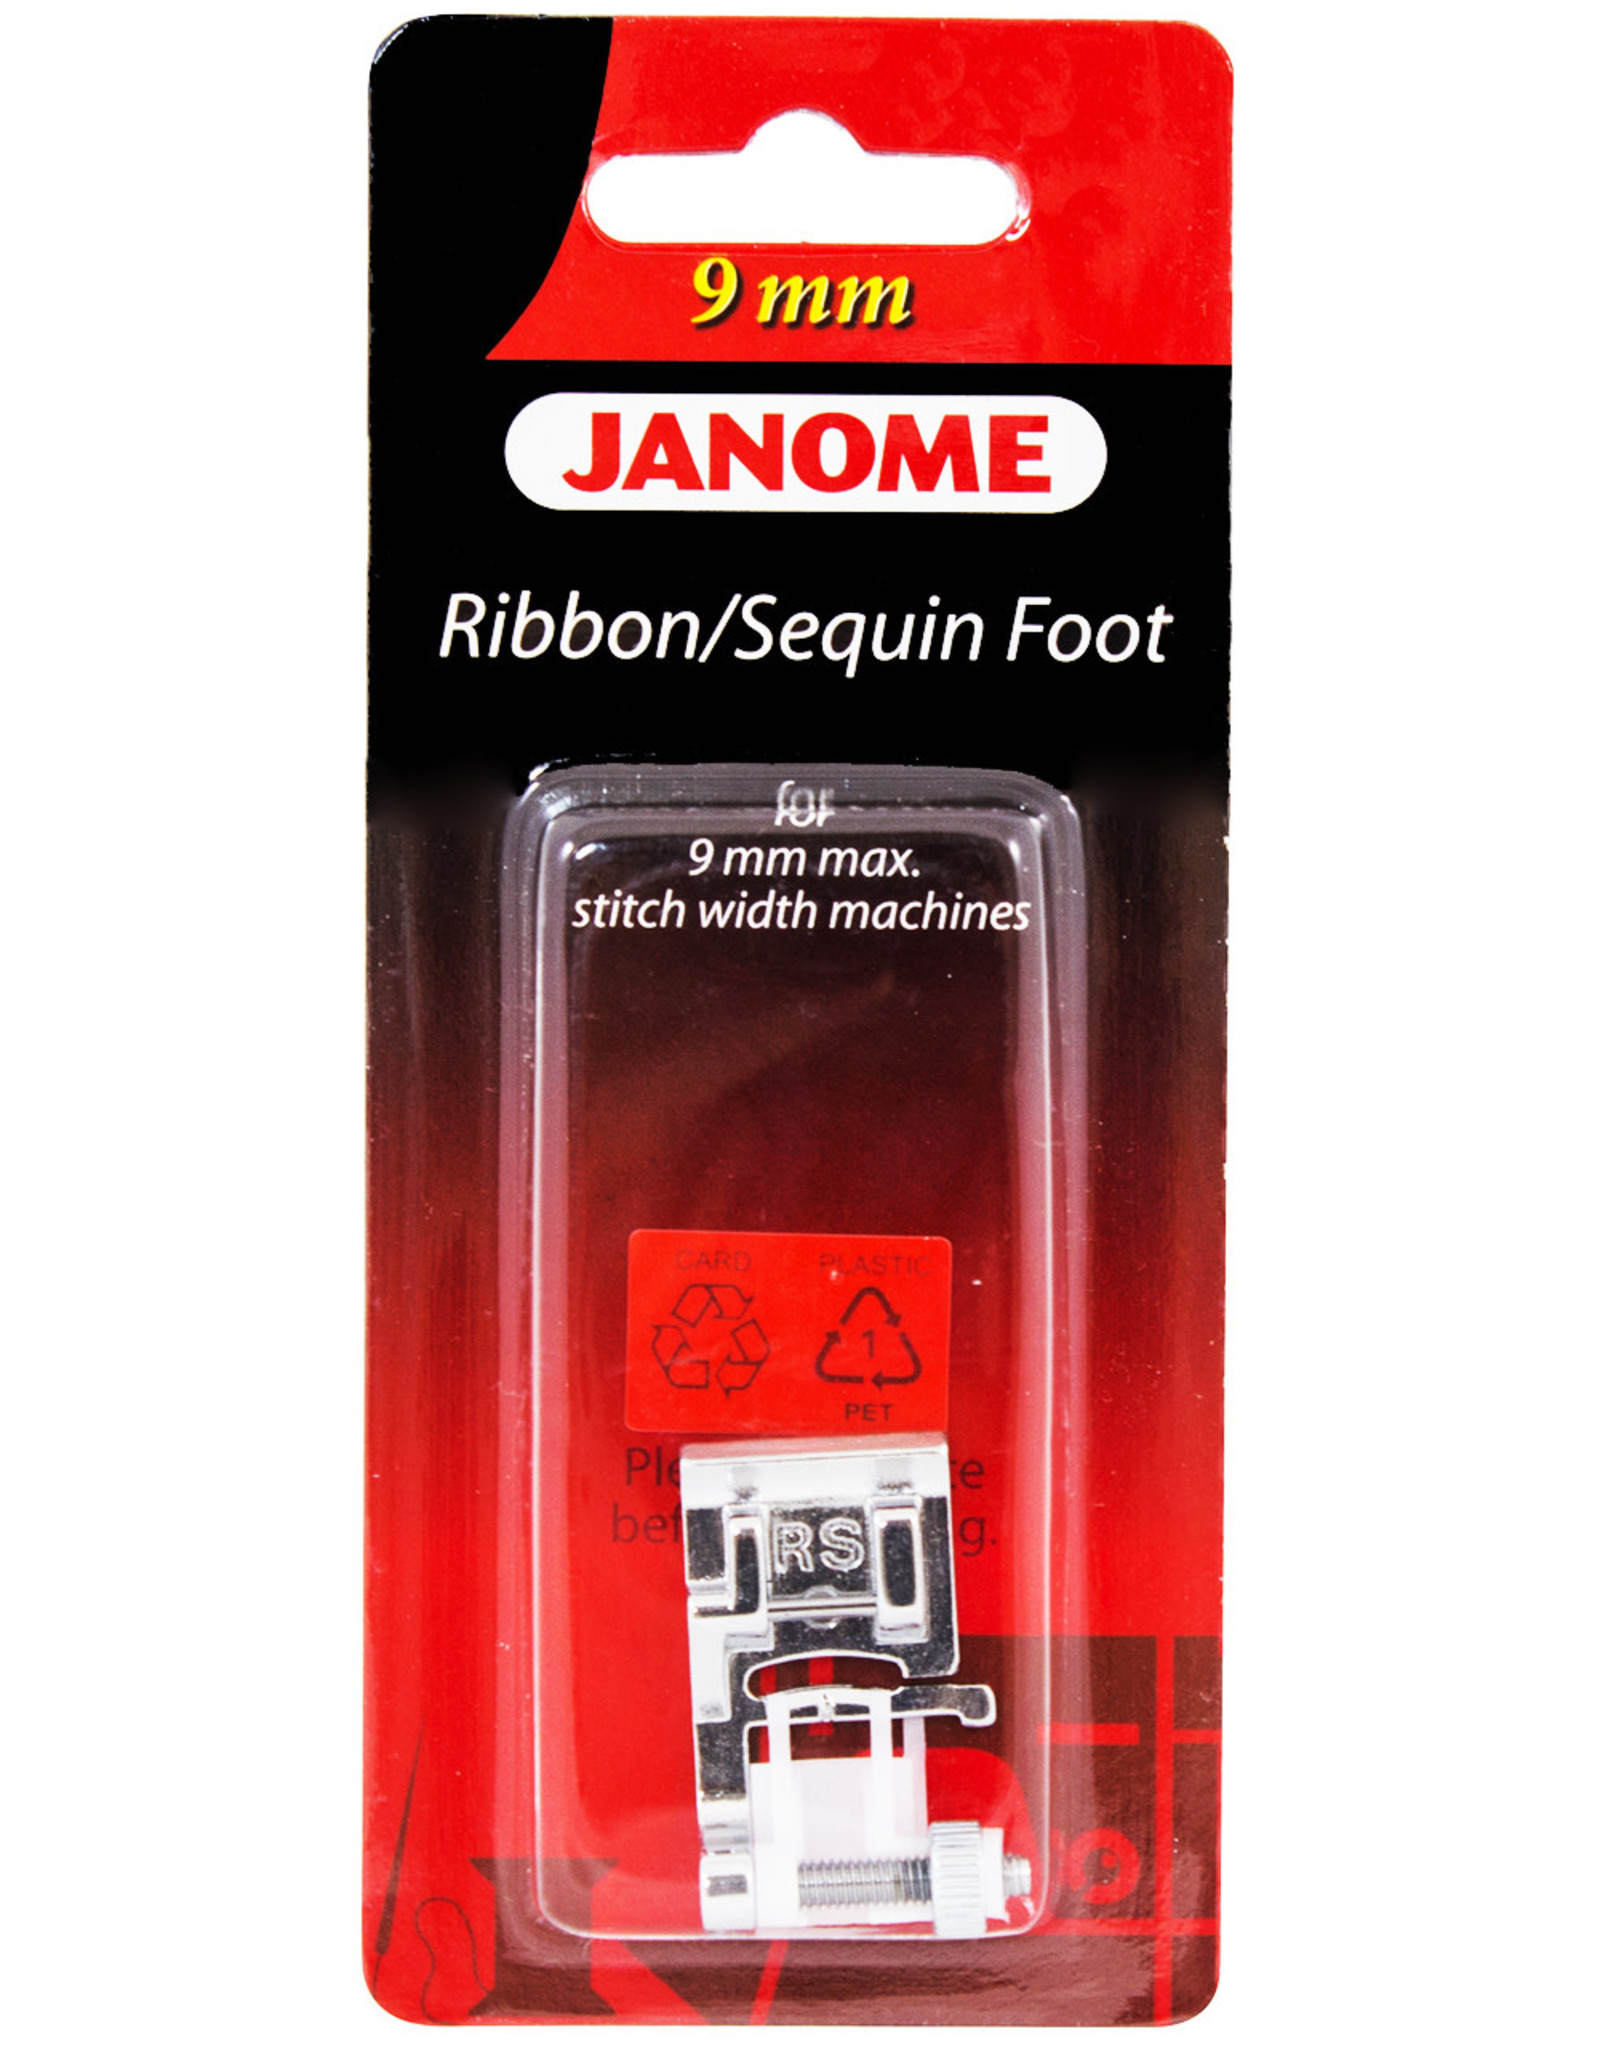 Janome 9mm Ribbon/Sequin Foot- 202090009